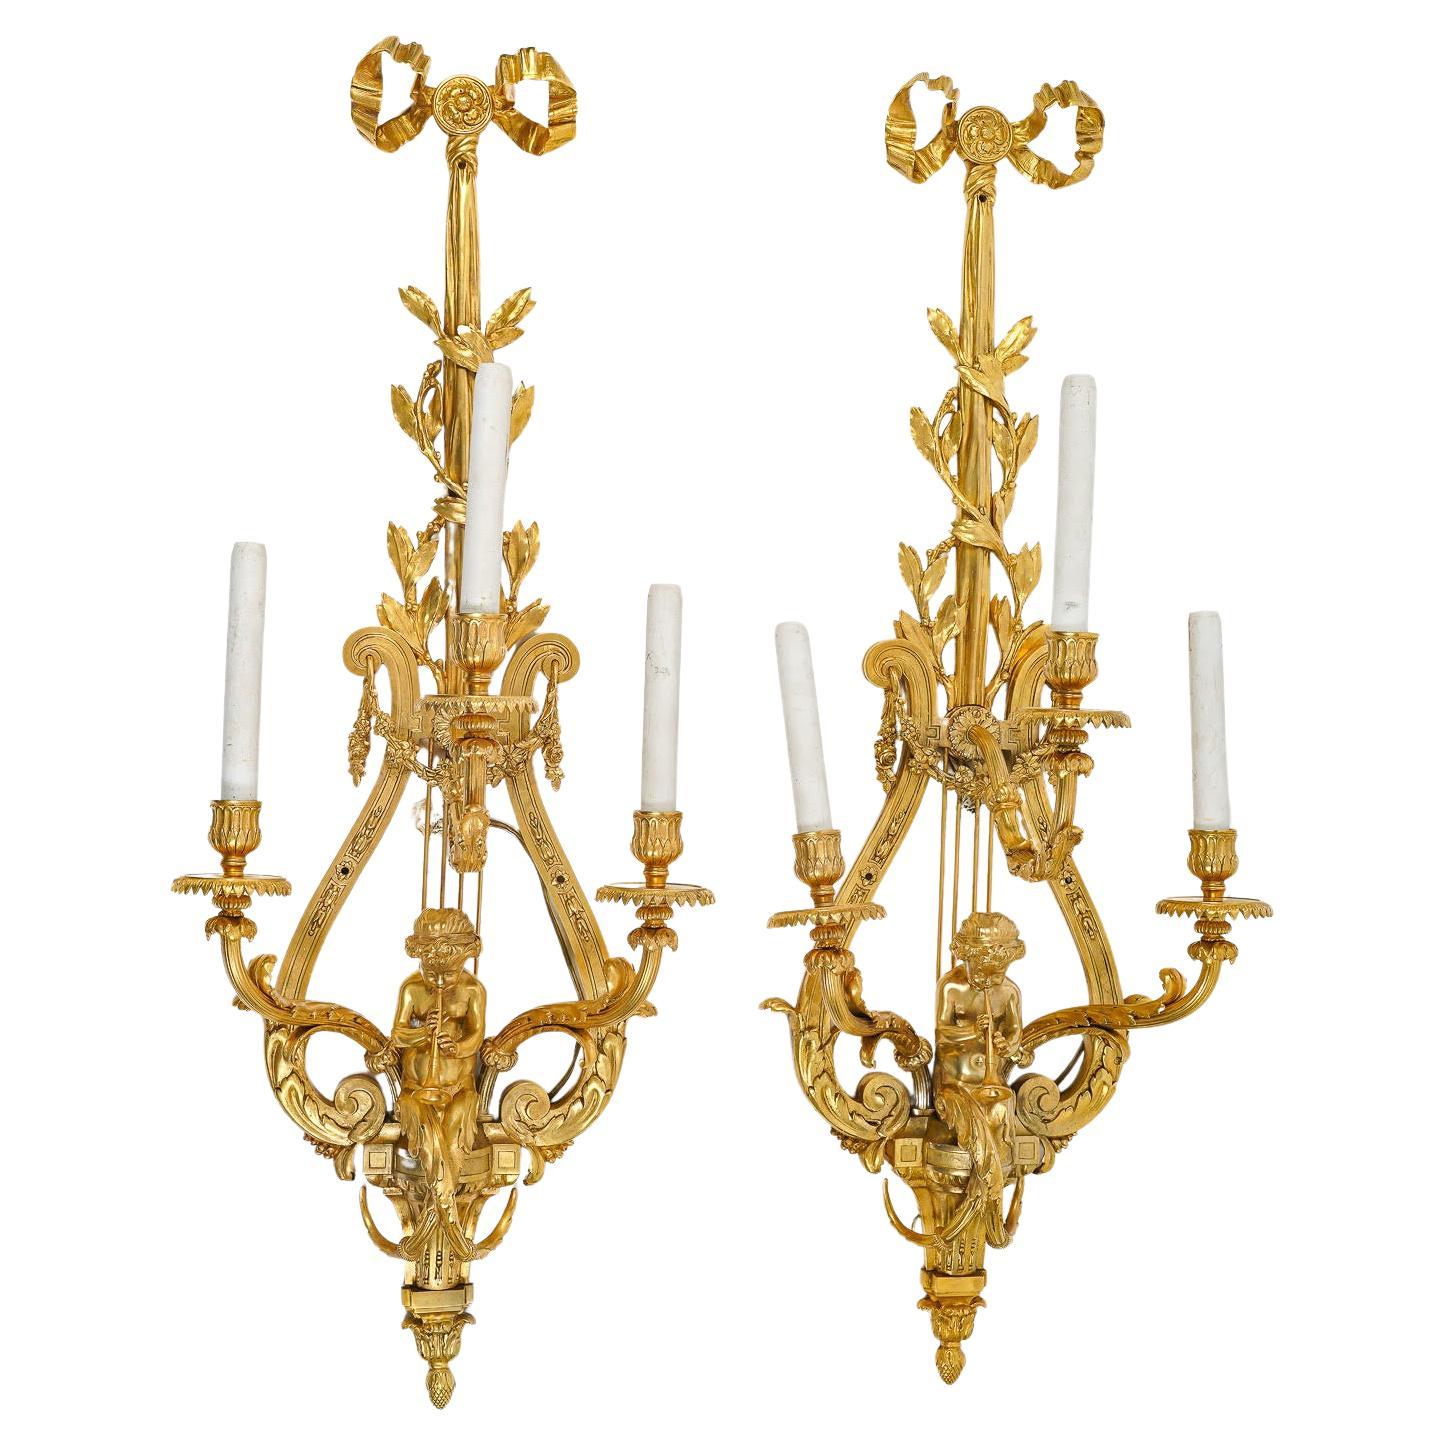 Large Pair of 19th Century Chased and Gilt Bronze Sconces.